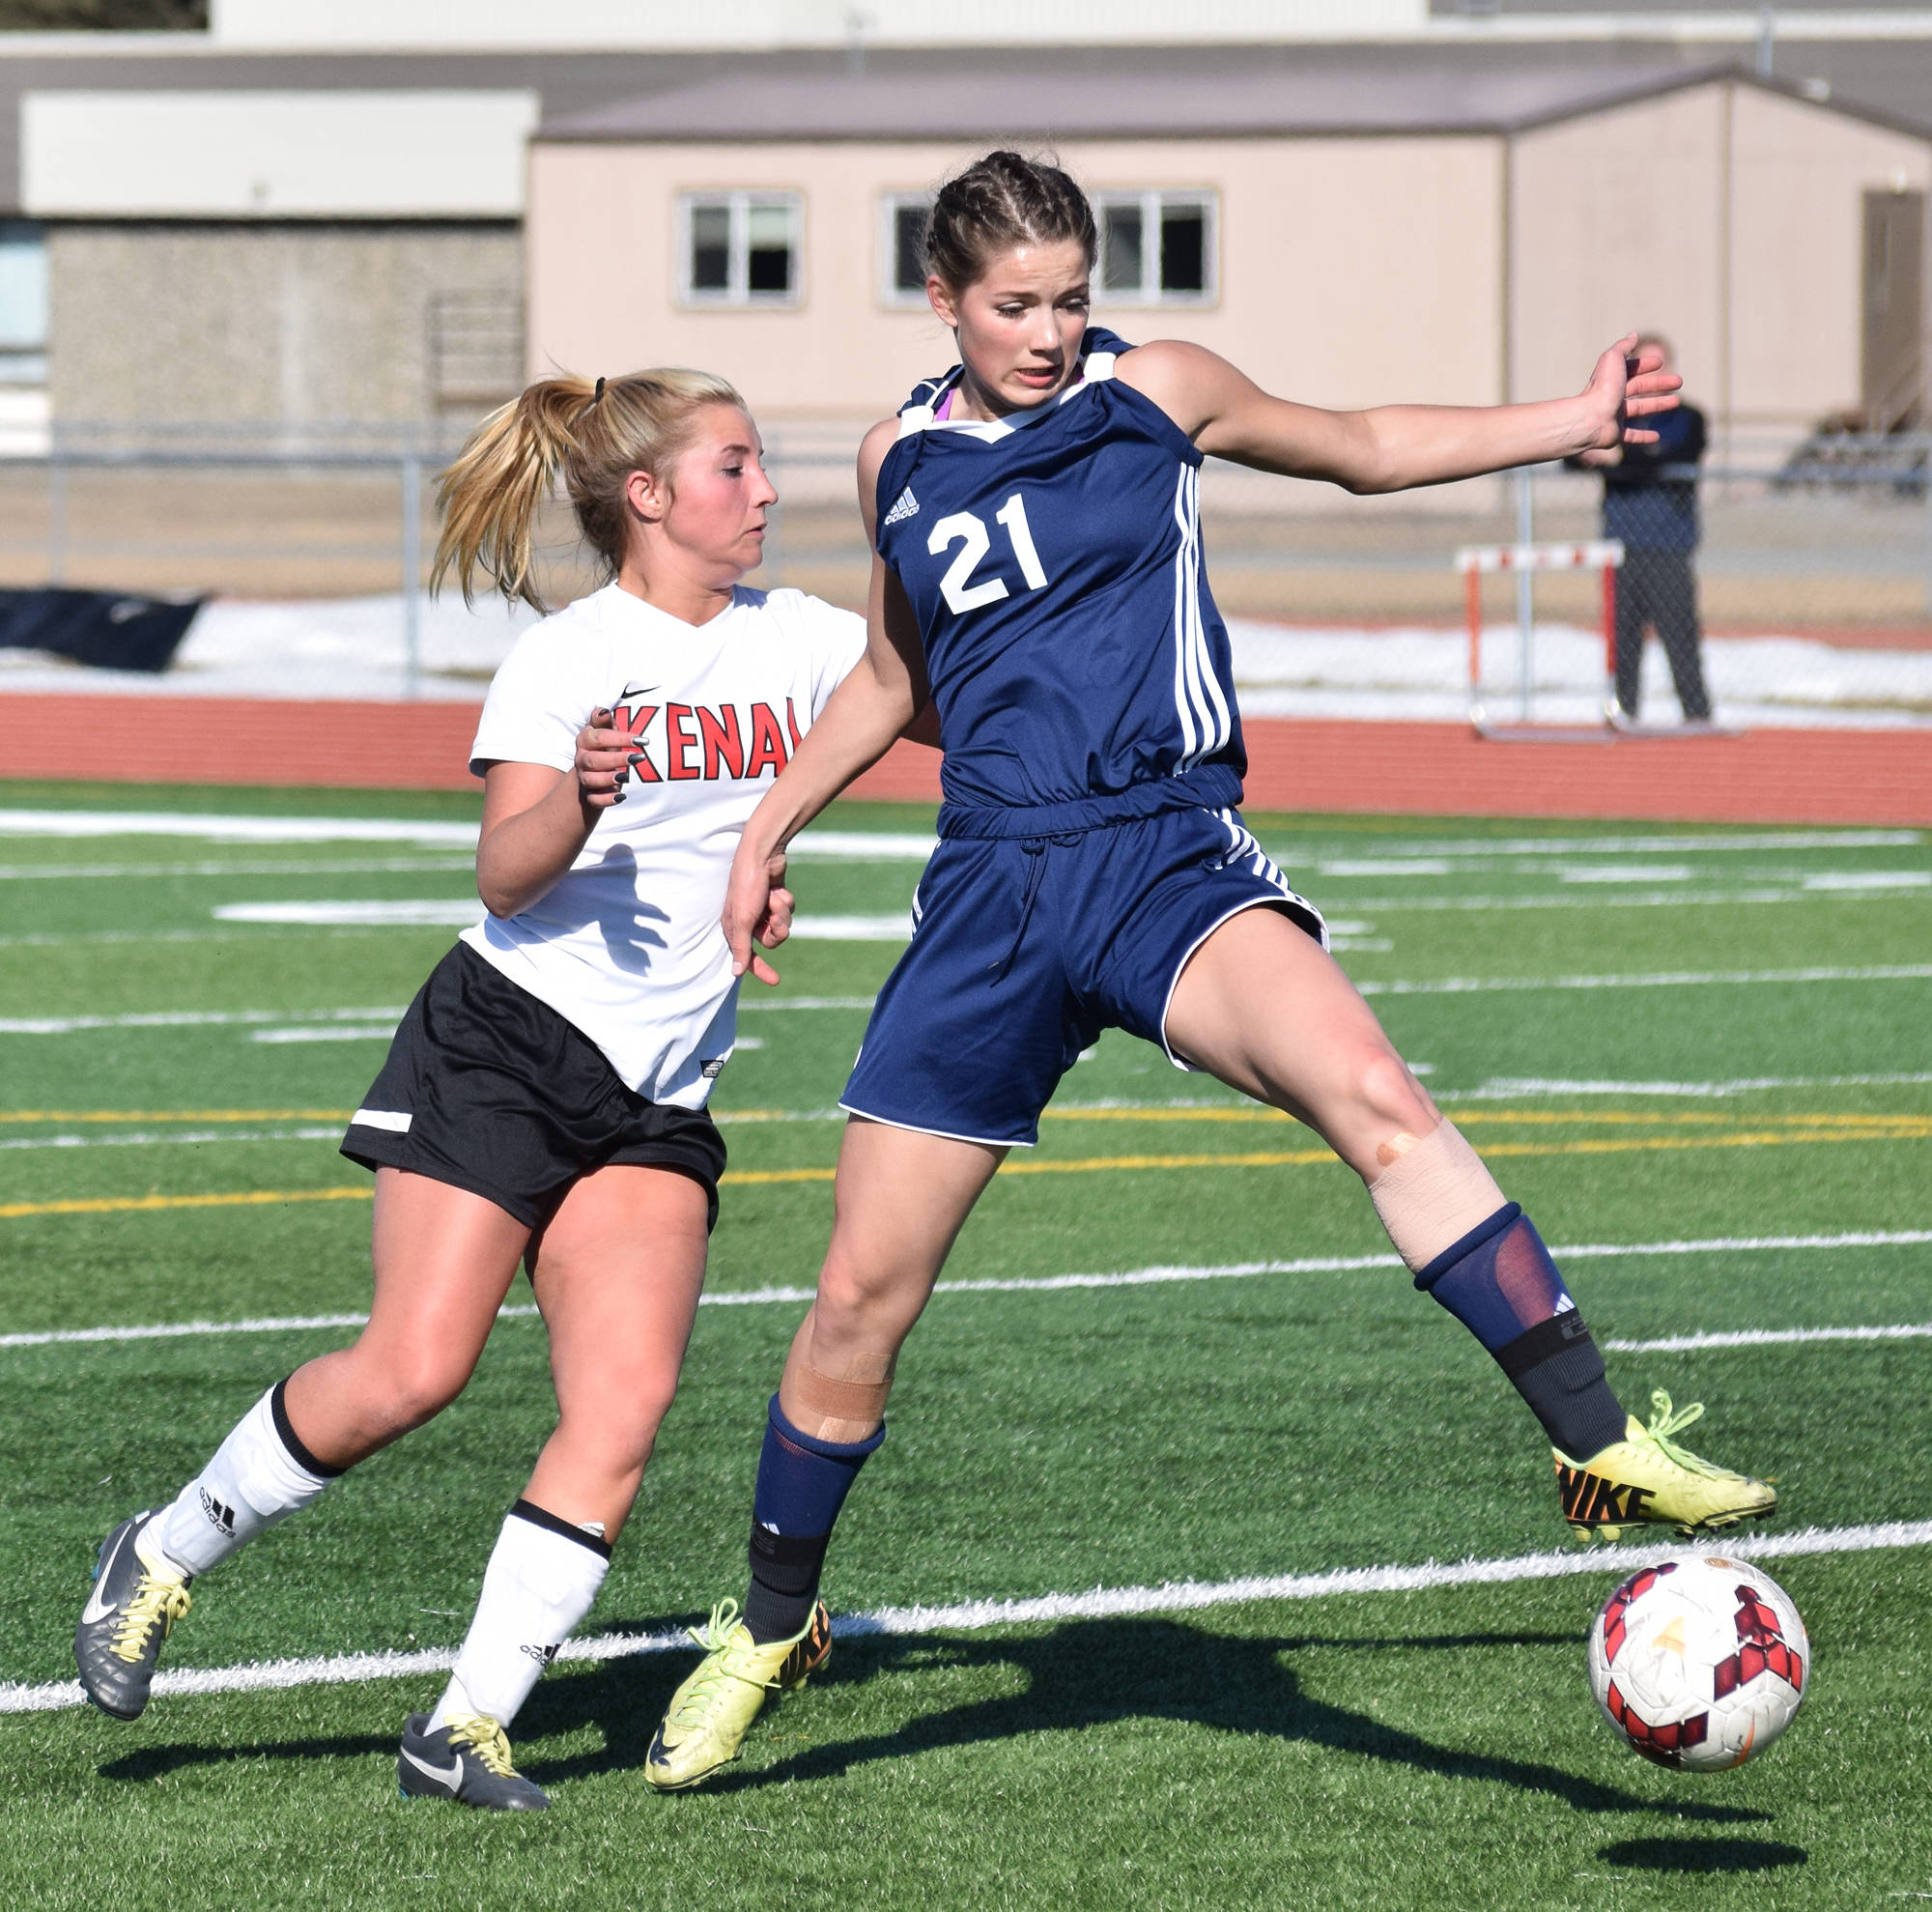 Soldotna’s Ella Stenga (21) works to keep the ball away from Kenai Central’s Annebelle Schneiders in a conference matchup Tuesday afternoon at Ed Hollier Field in Kenai. (Photo by Joey Klecka/Peninsula Clarion)